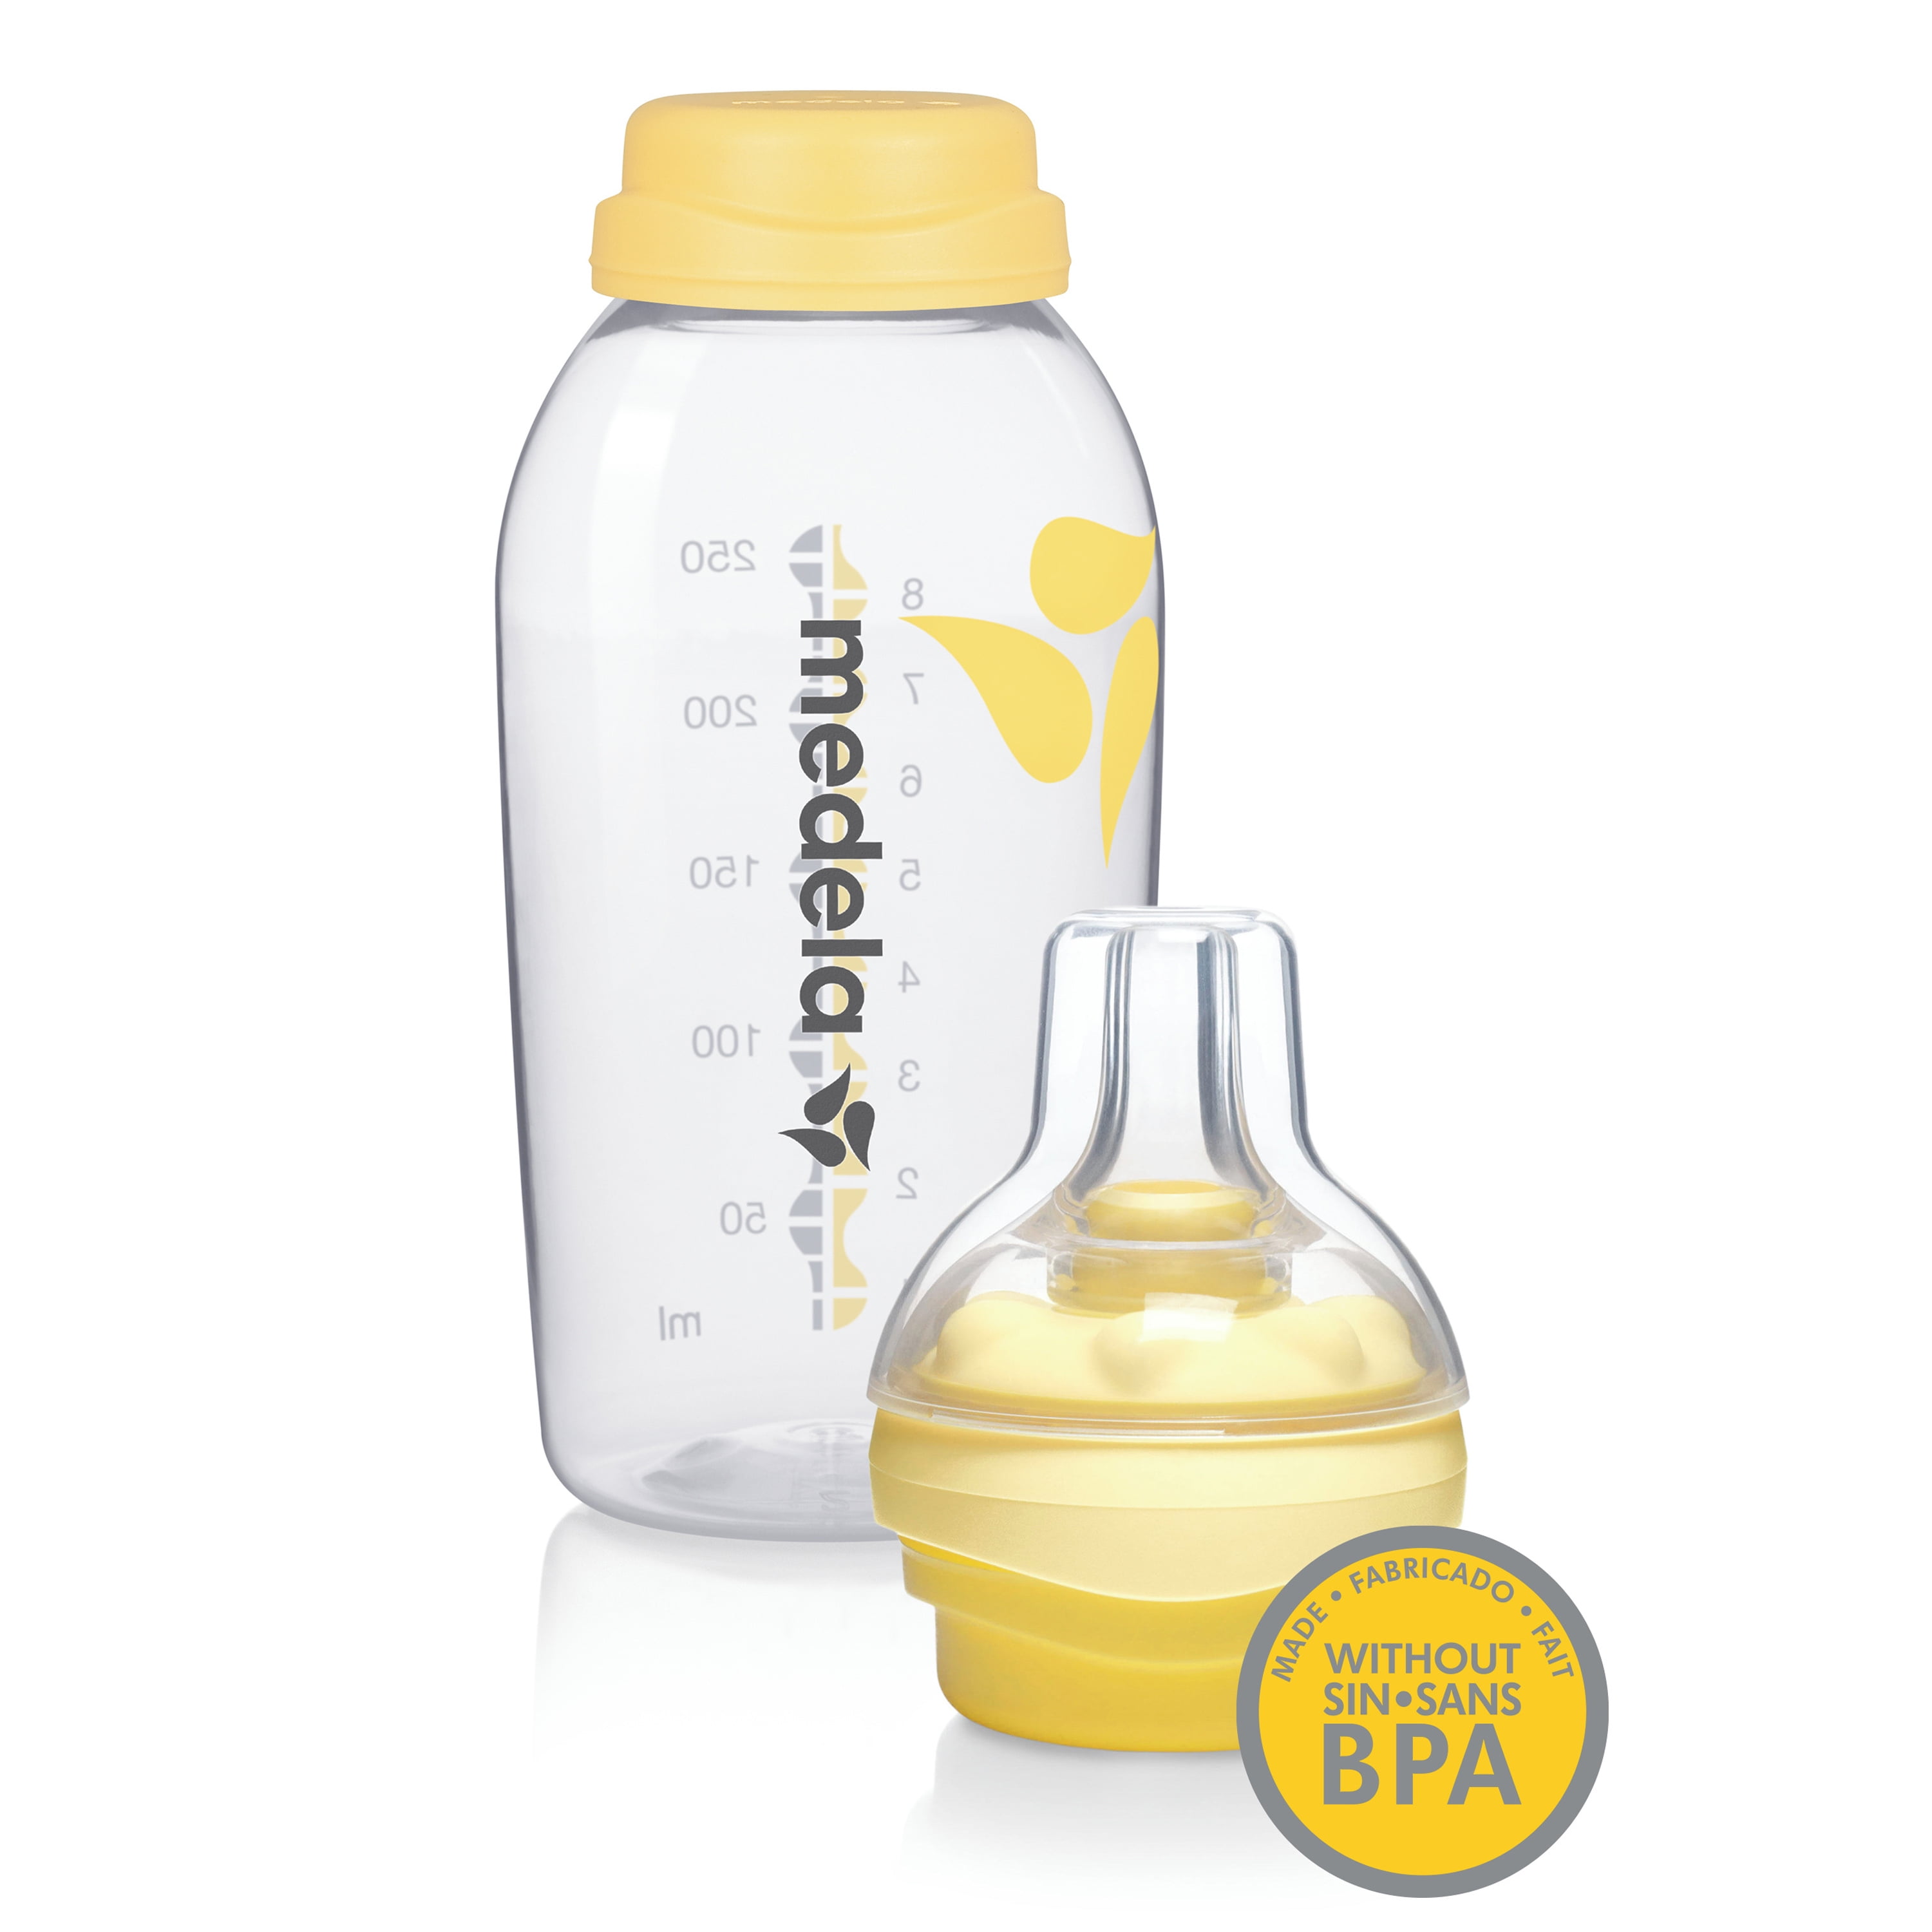 Medela Calma Bottle Nipple and Collection Bottles, Made without BPA,  Air-Vent System, 8oz / 250mL 